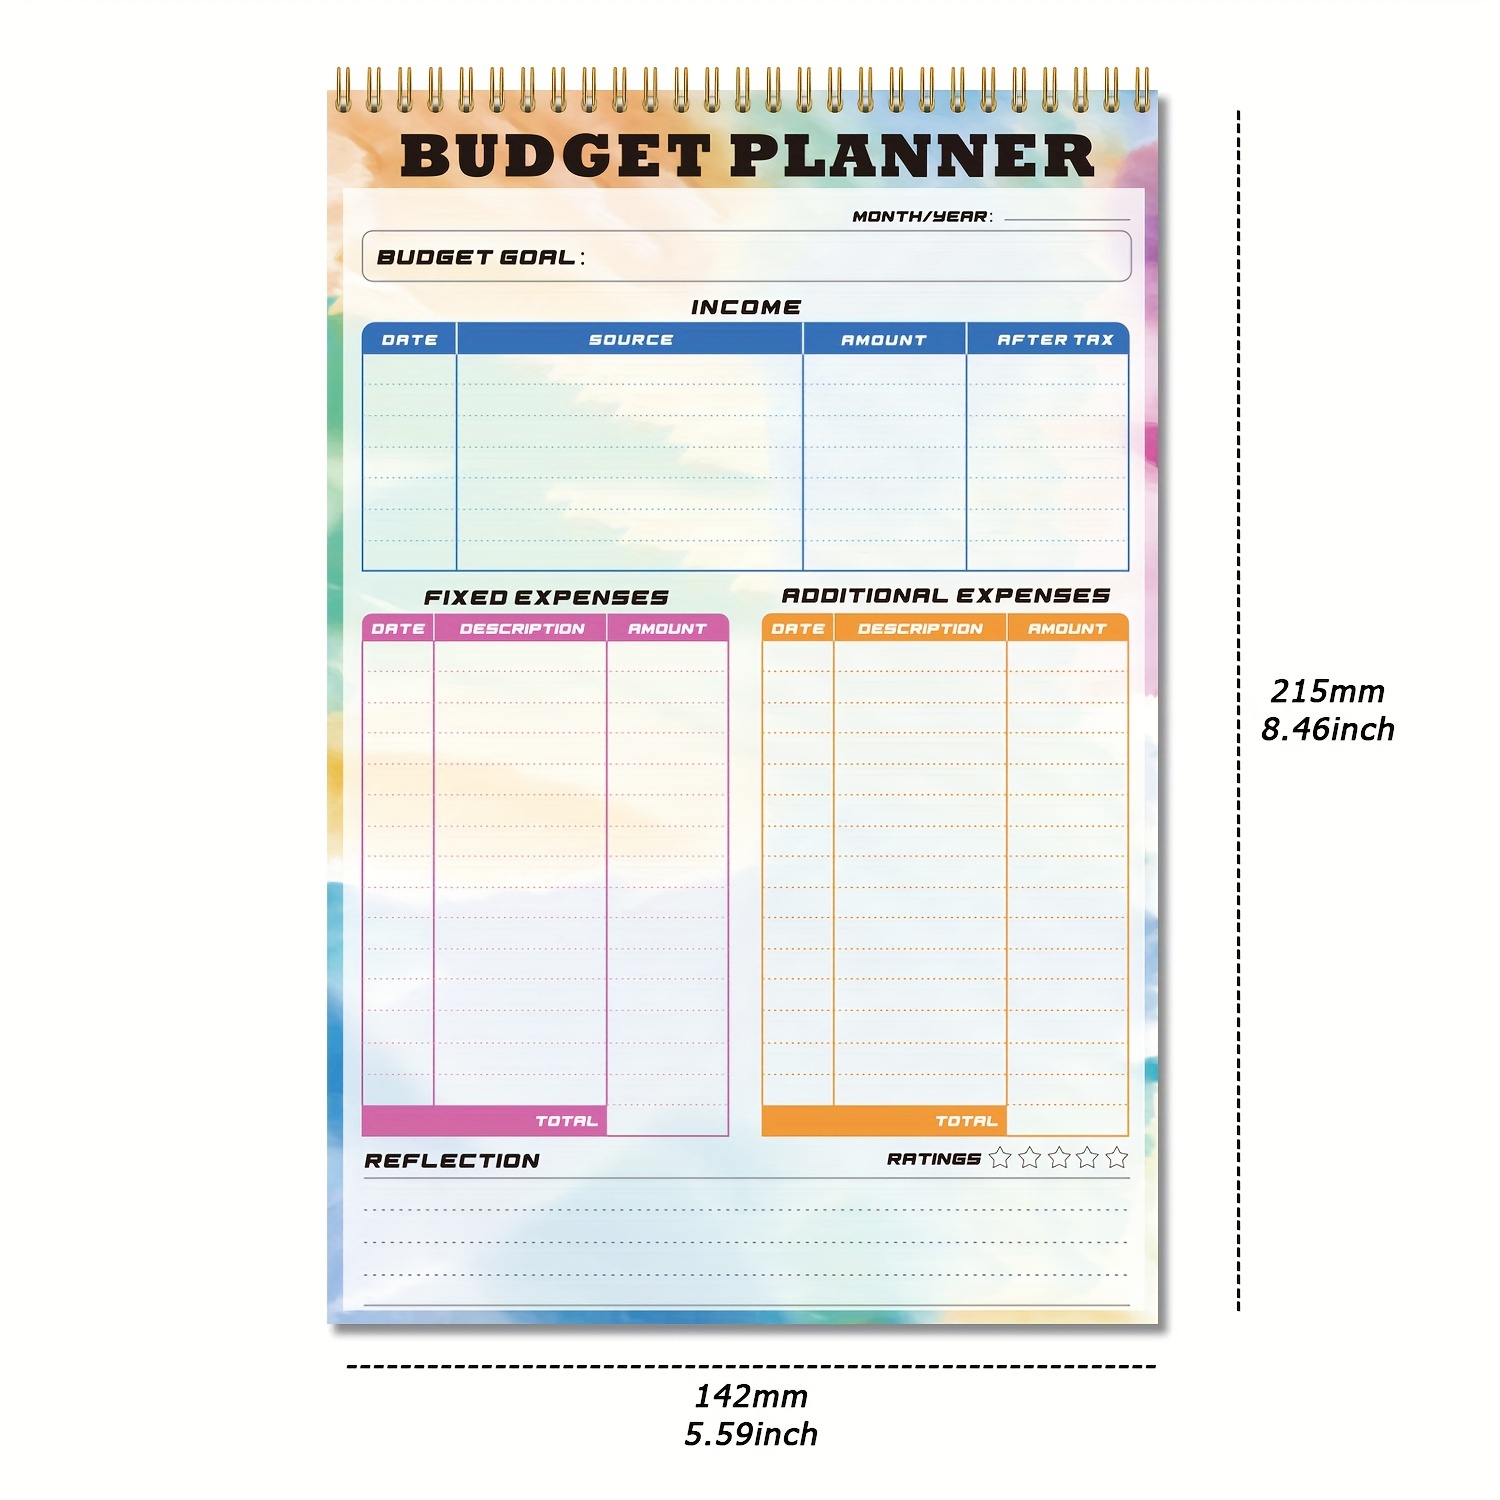 Budget Binder Personal Finance Planner Bundle for the Mini